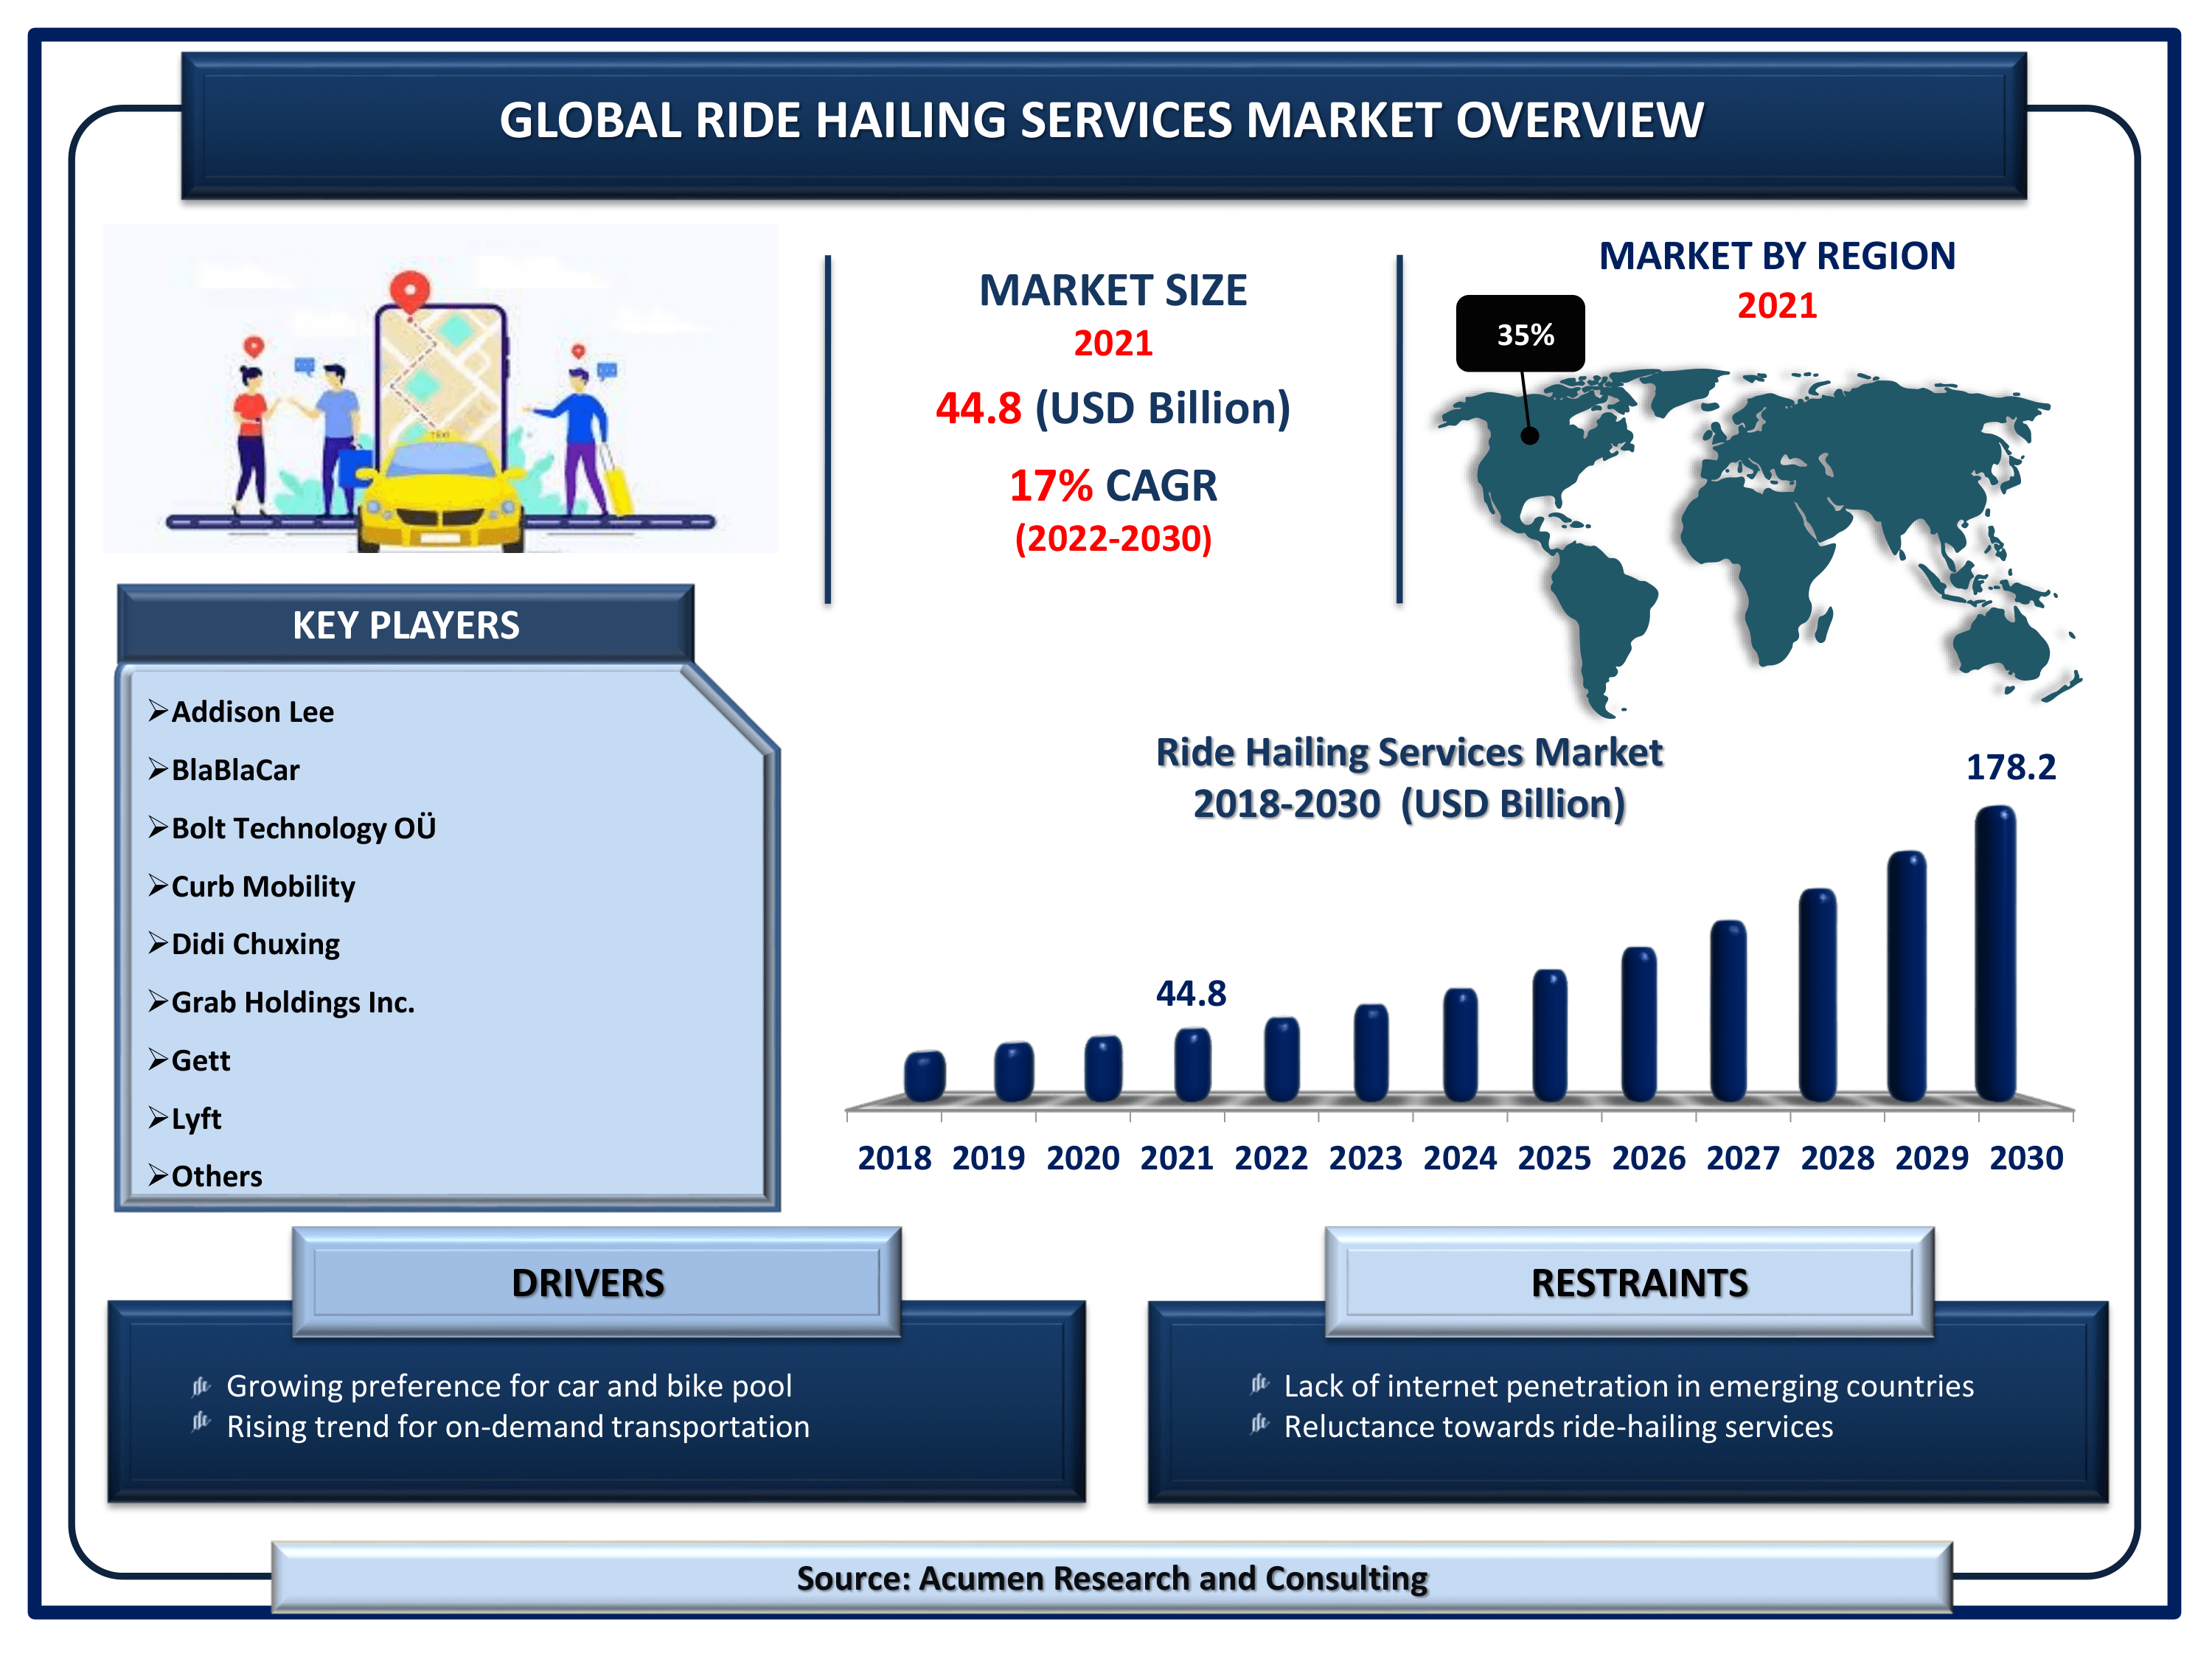 Global ride hailing services market revenue is estimated to reach USD 178.2 Billion by 2030 with a CAGR of 17% from 2022 to 2030